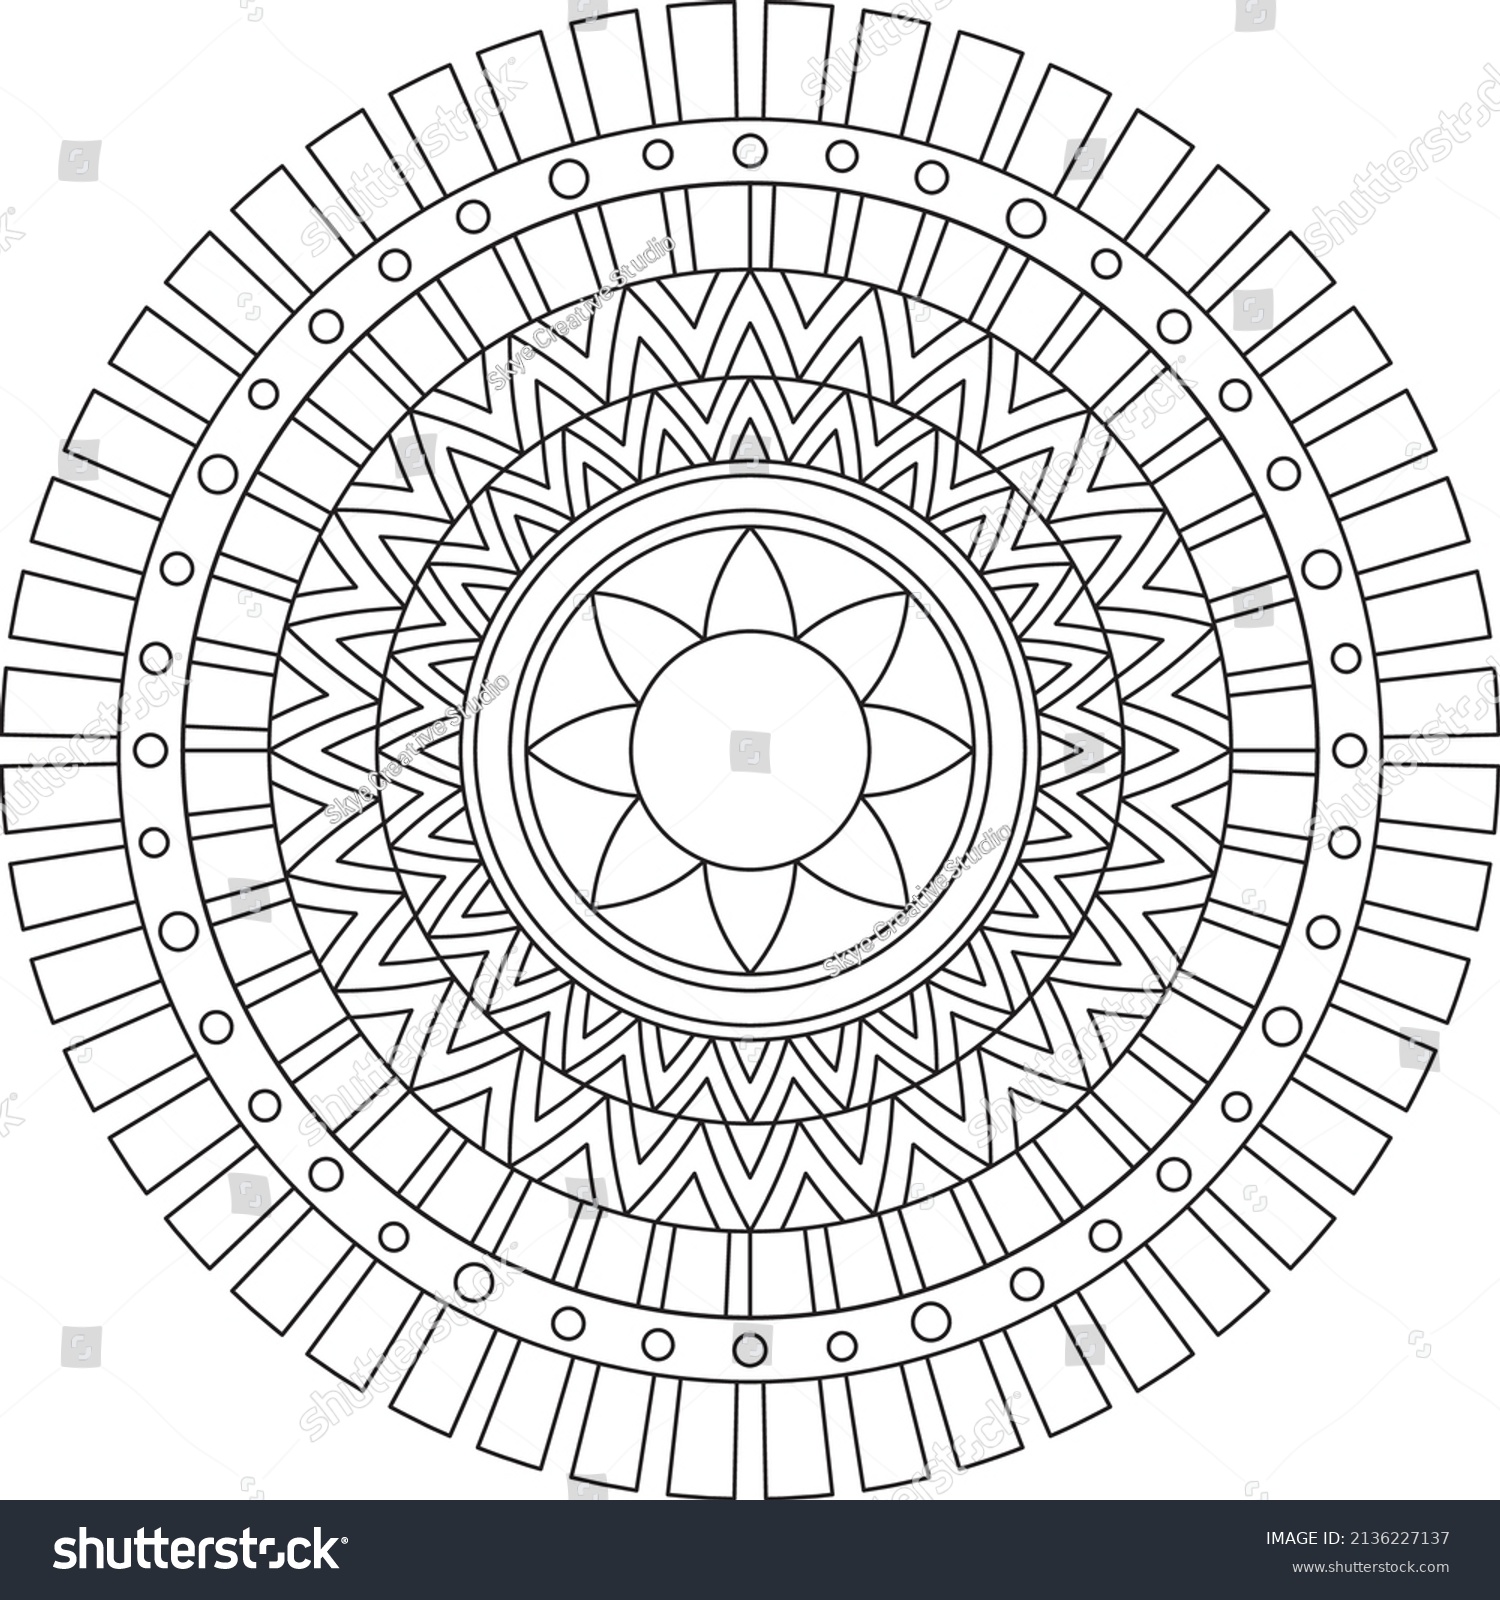 SVG of Simple mandala for relaxation. Flower mandala meditation coloring. Decorative ornament in ethnic oriental style, round shape and patterns for background and coloring book pages. svg